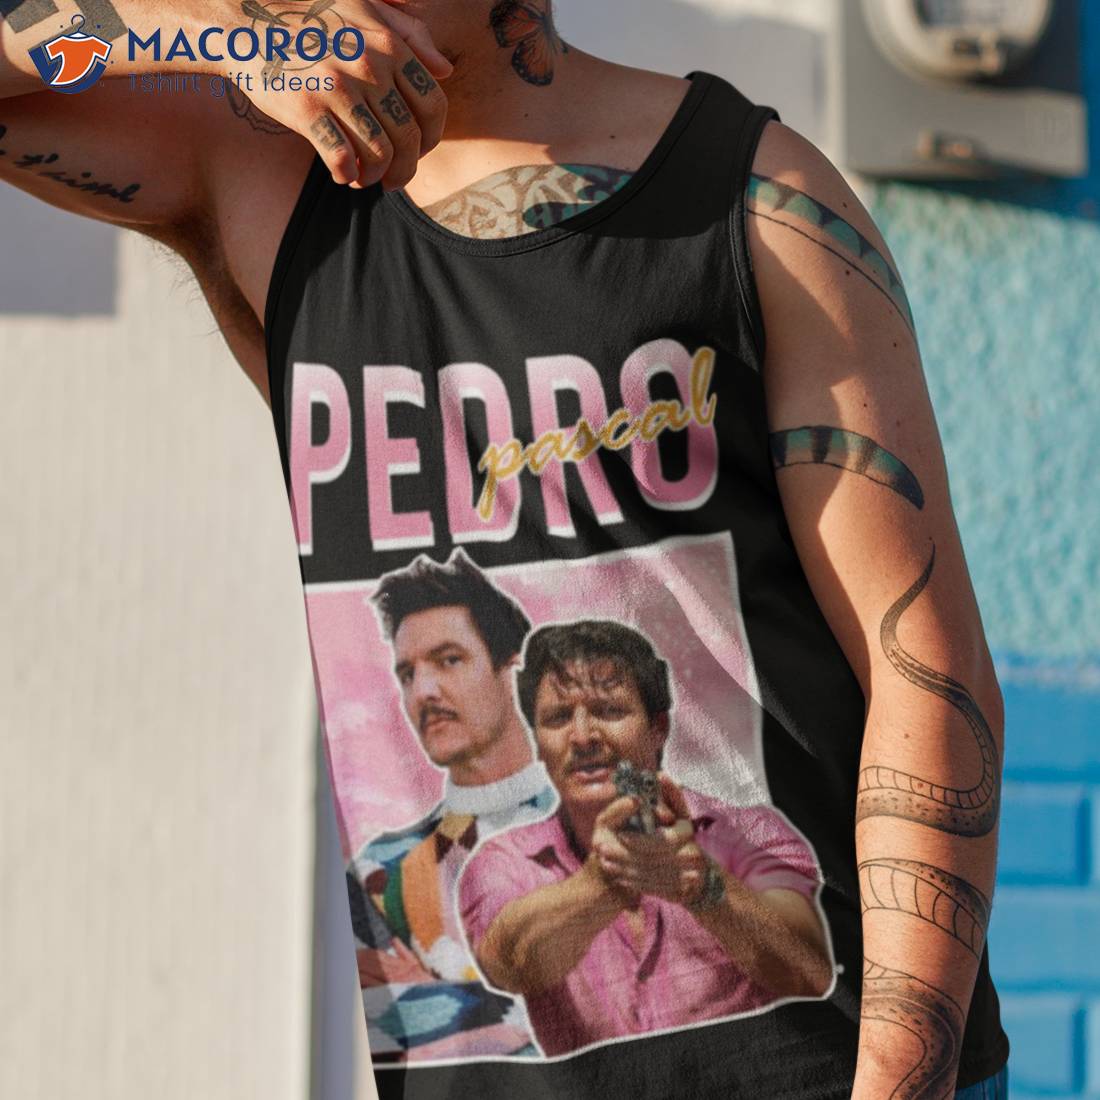 mommysissue on IG tattooed this portrait of #pedropascal ! Check out ... |  TikTok